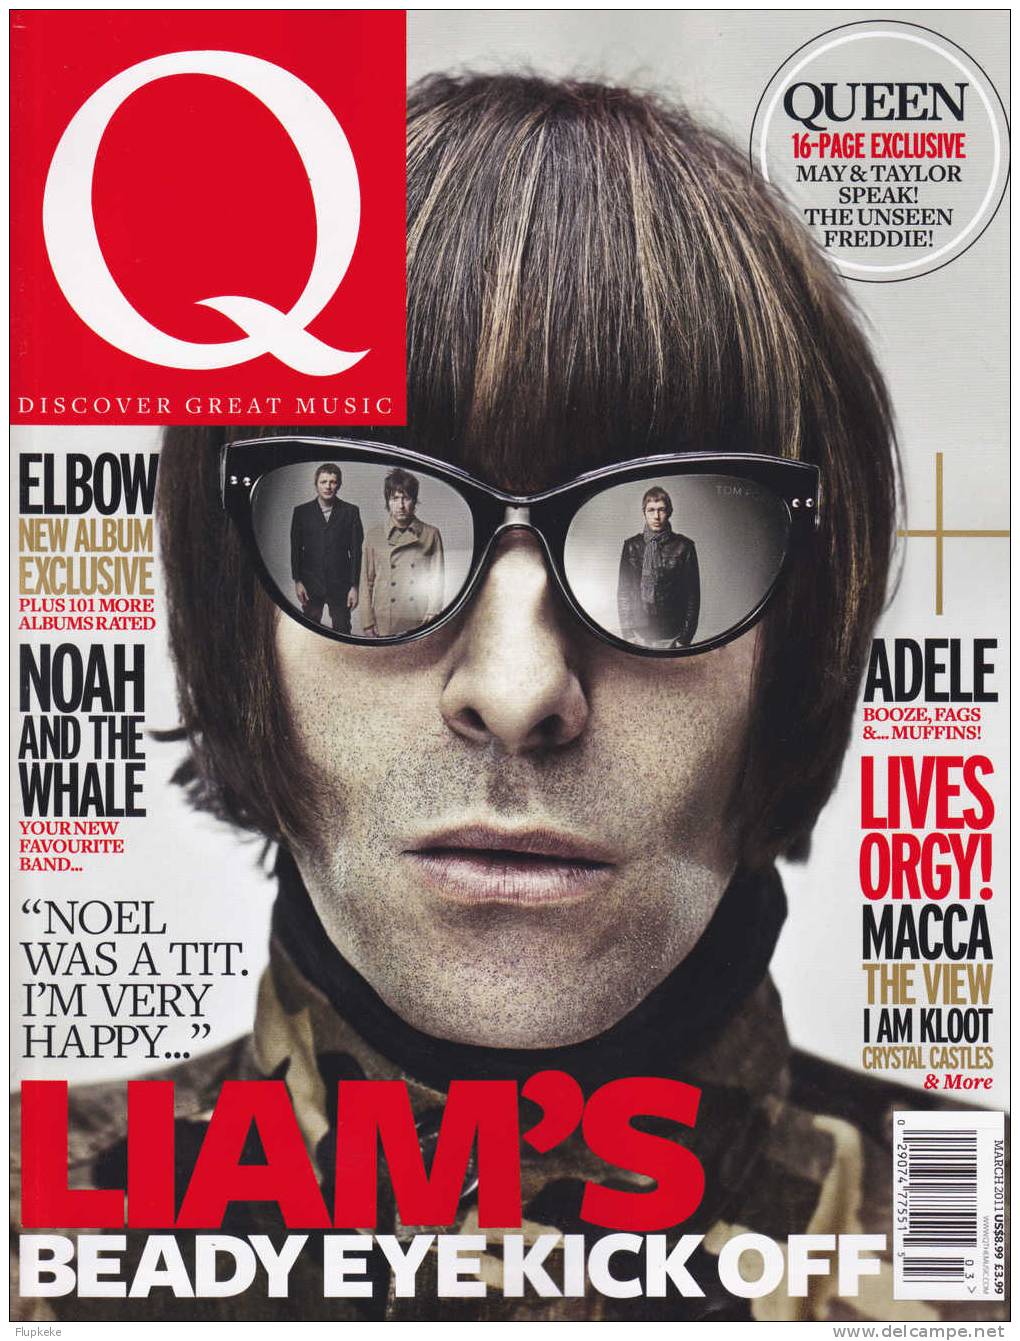 Q 296 March 2011 Liam´s Beady Eye Kick Off Queen 16 Page Exclusive - Entertainment